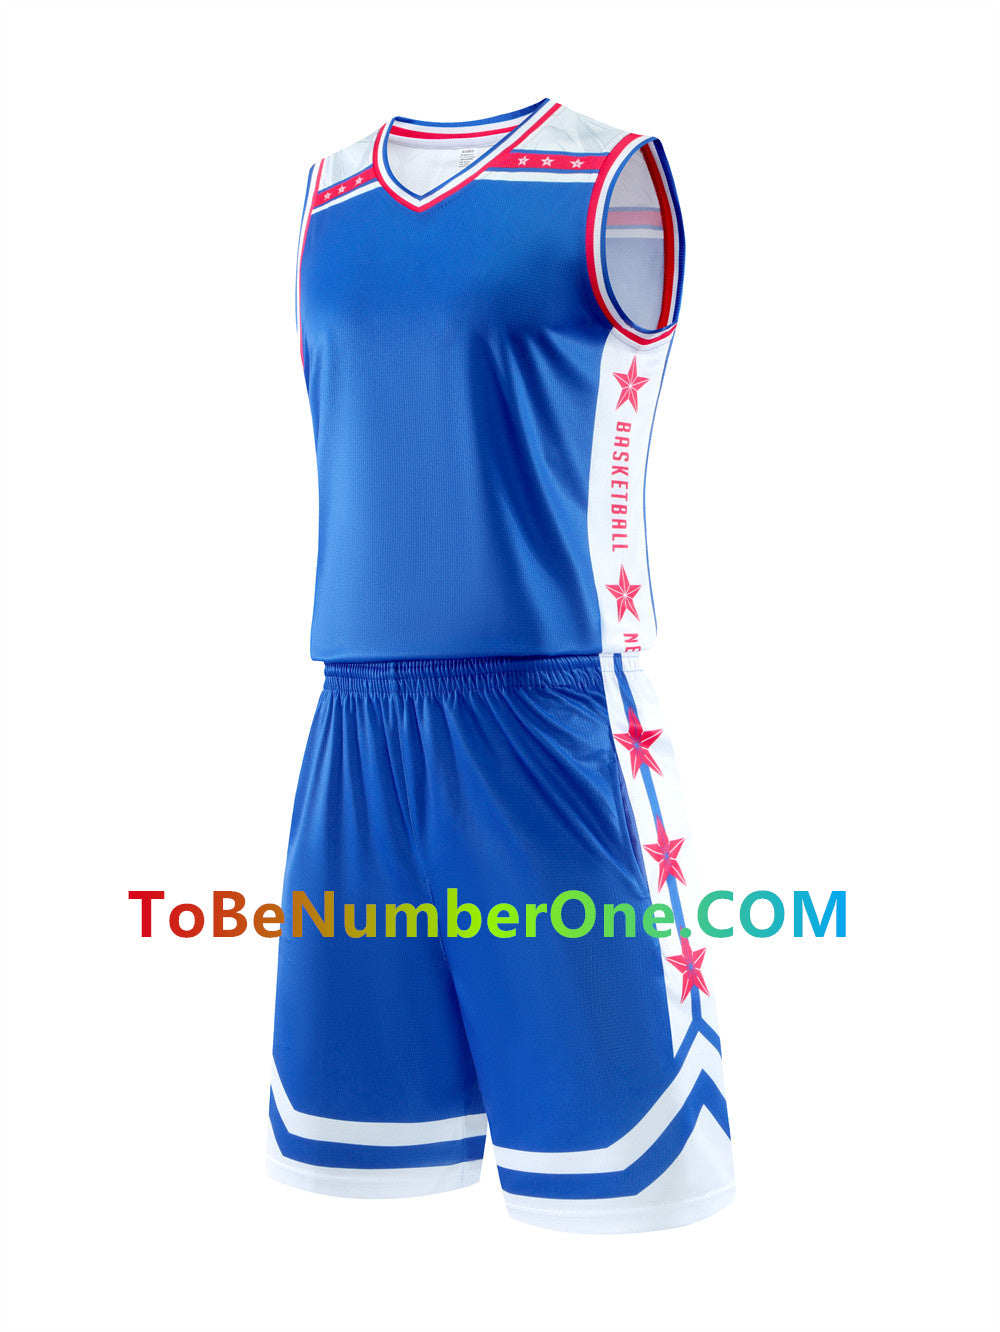 Customize instock High Quality Quick-drying basketball uniforms print with team name , player and number.  jerseys&shorts with pocket 231#